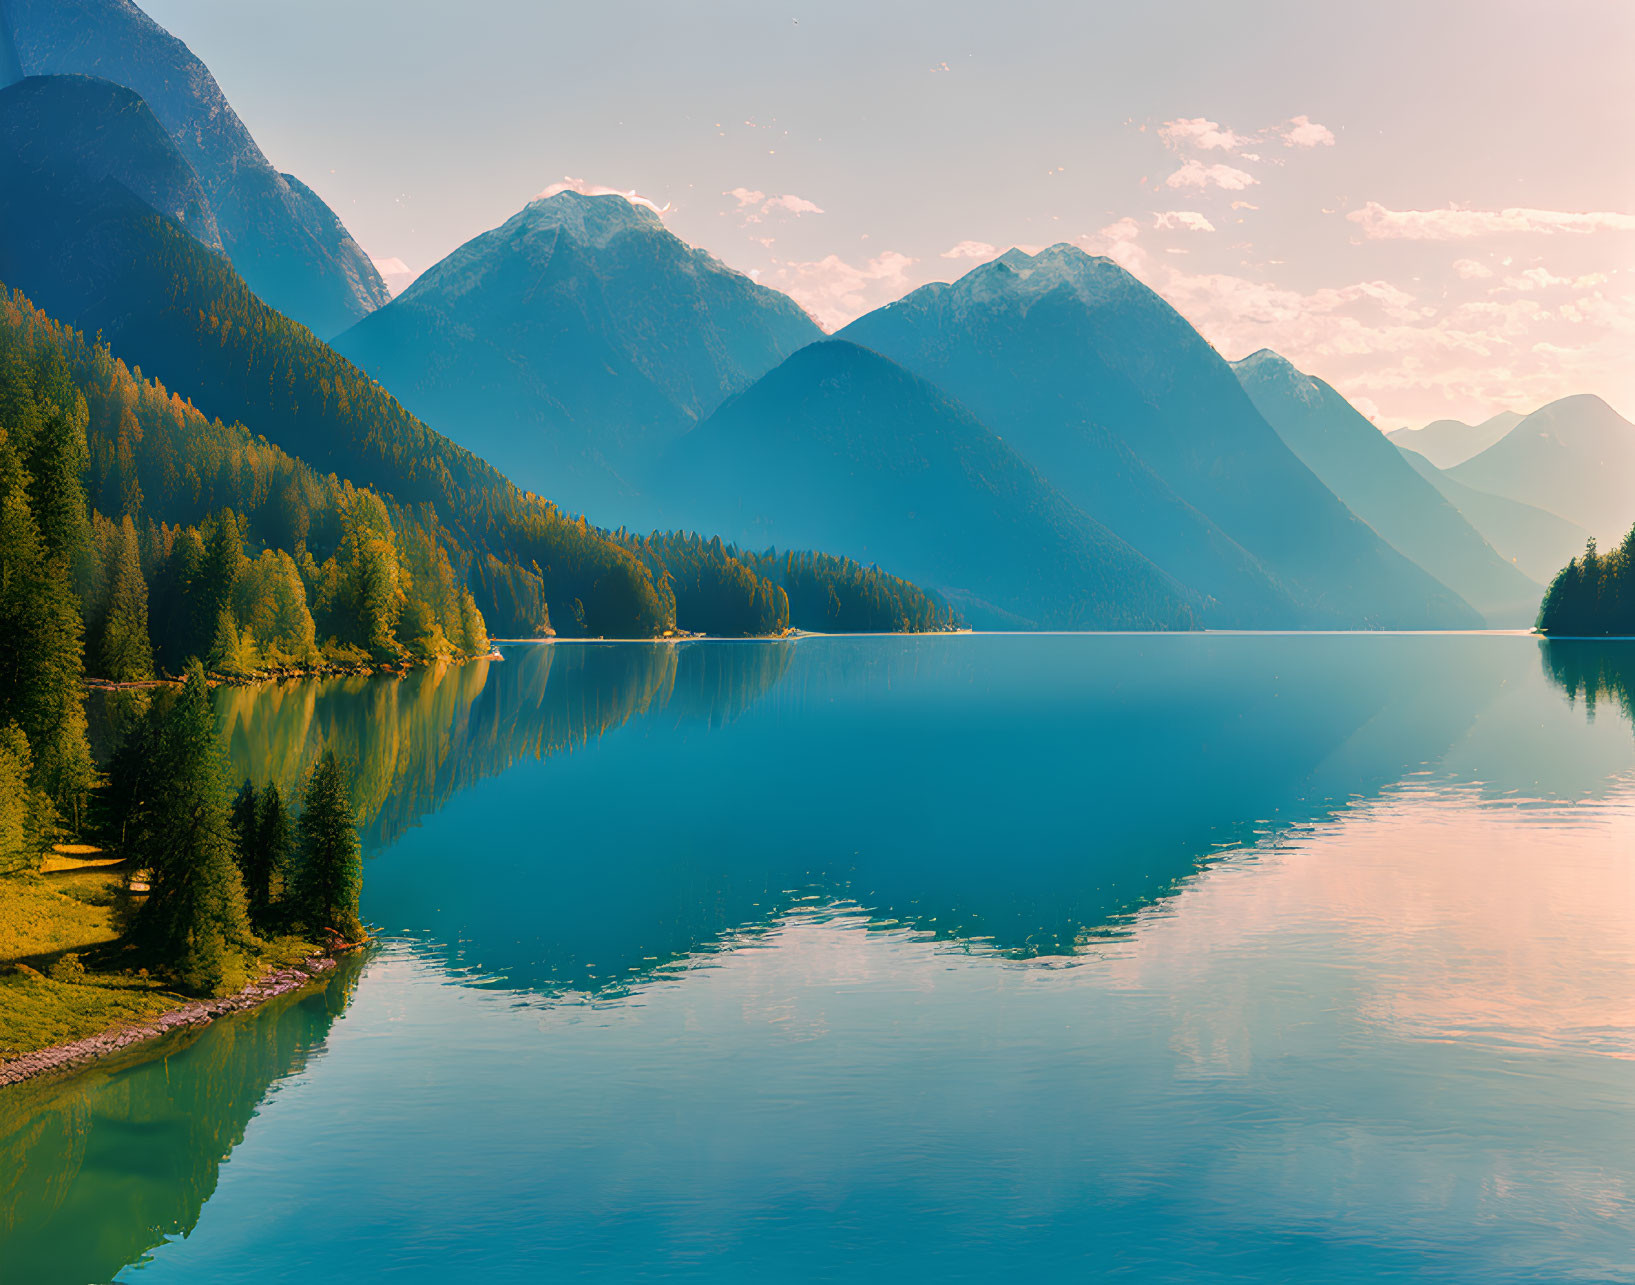 Serene lake with reflections of green trees and mountains under golden sky